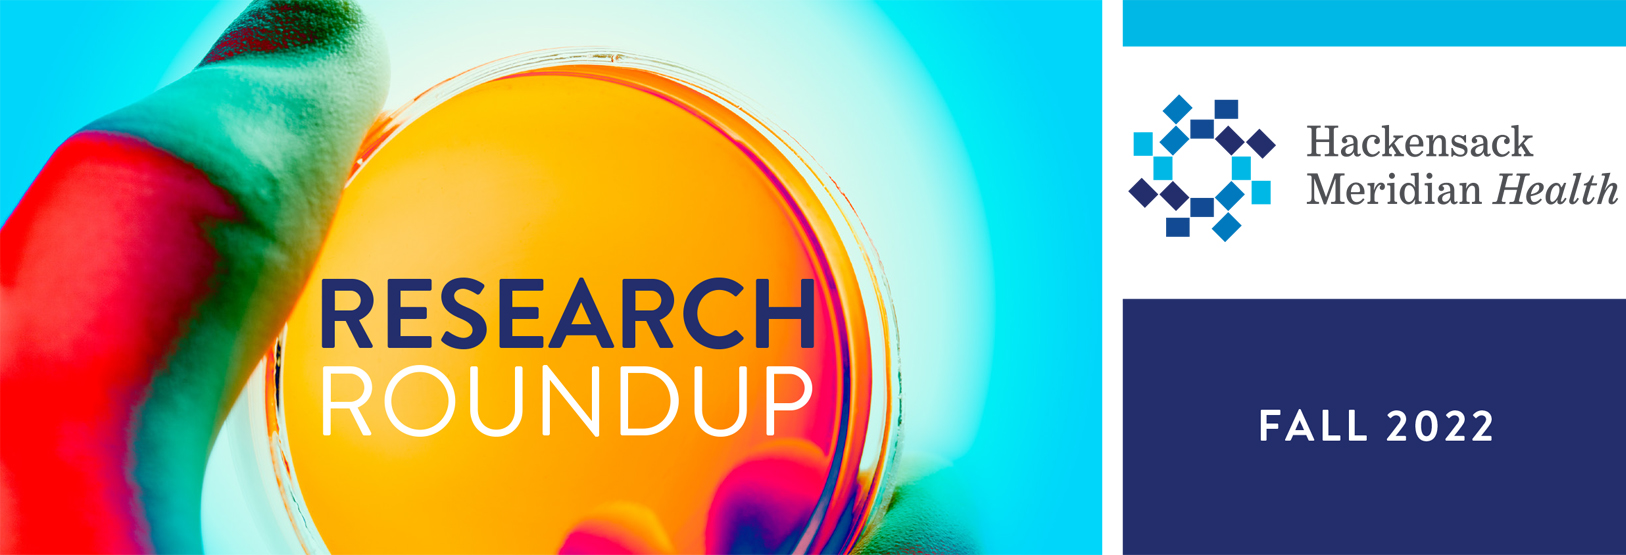 Research Round Up Newsletter Banner Image